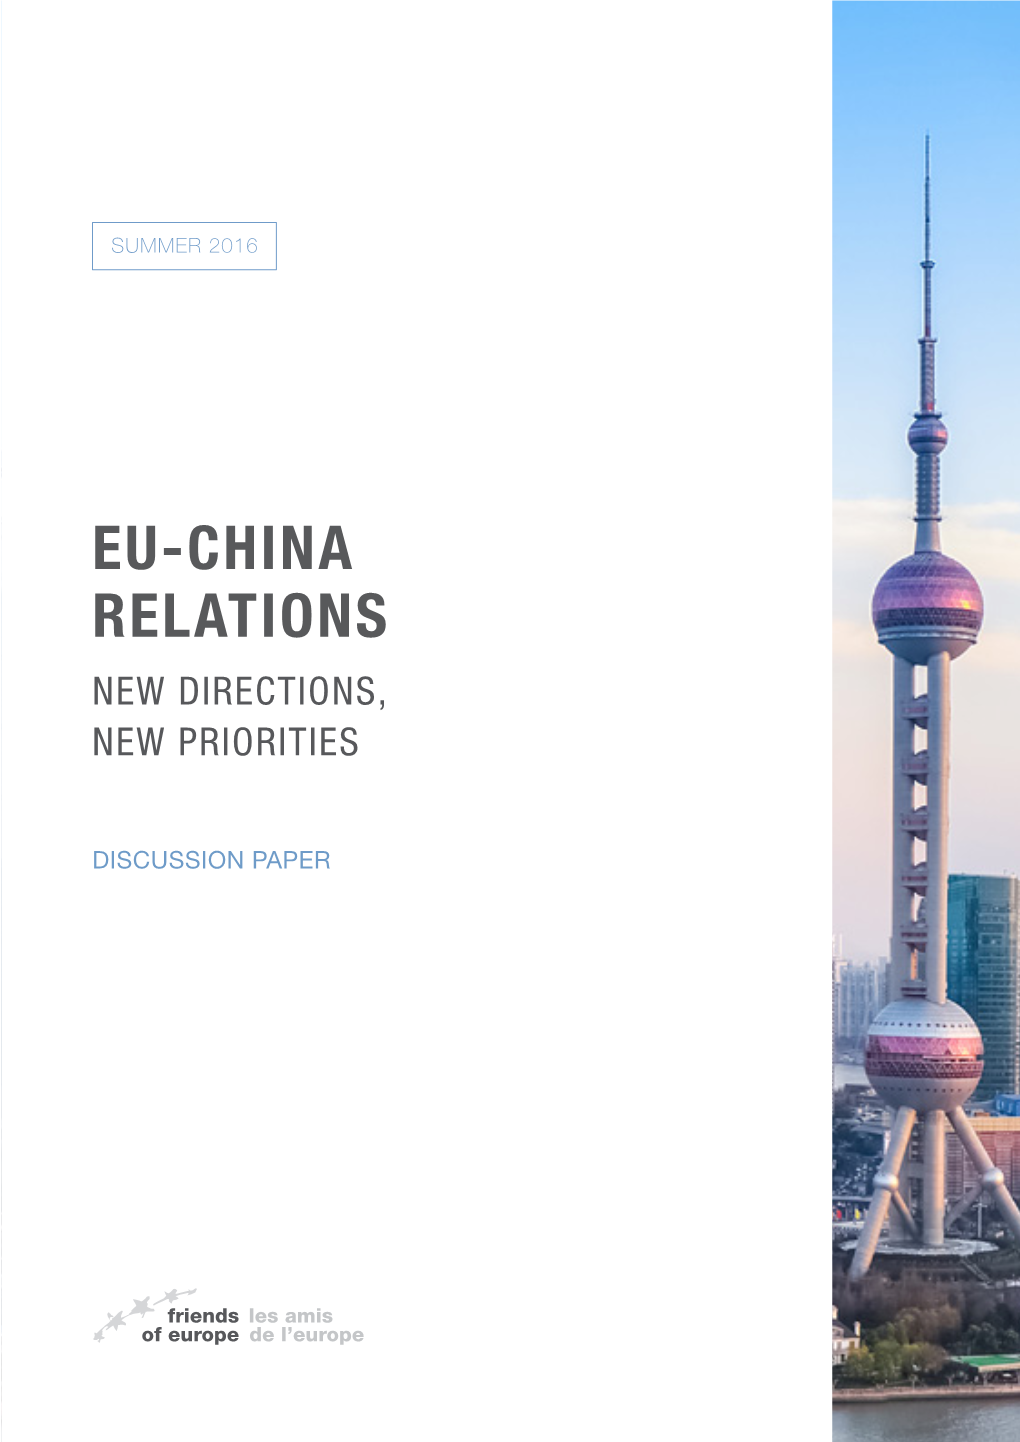 EU-CHINA Relations New Directions, New Priorities